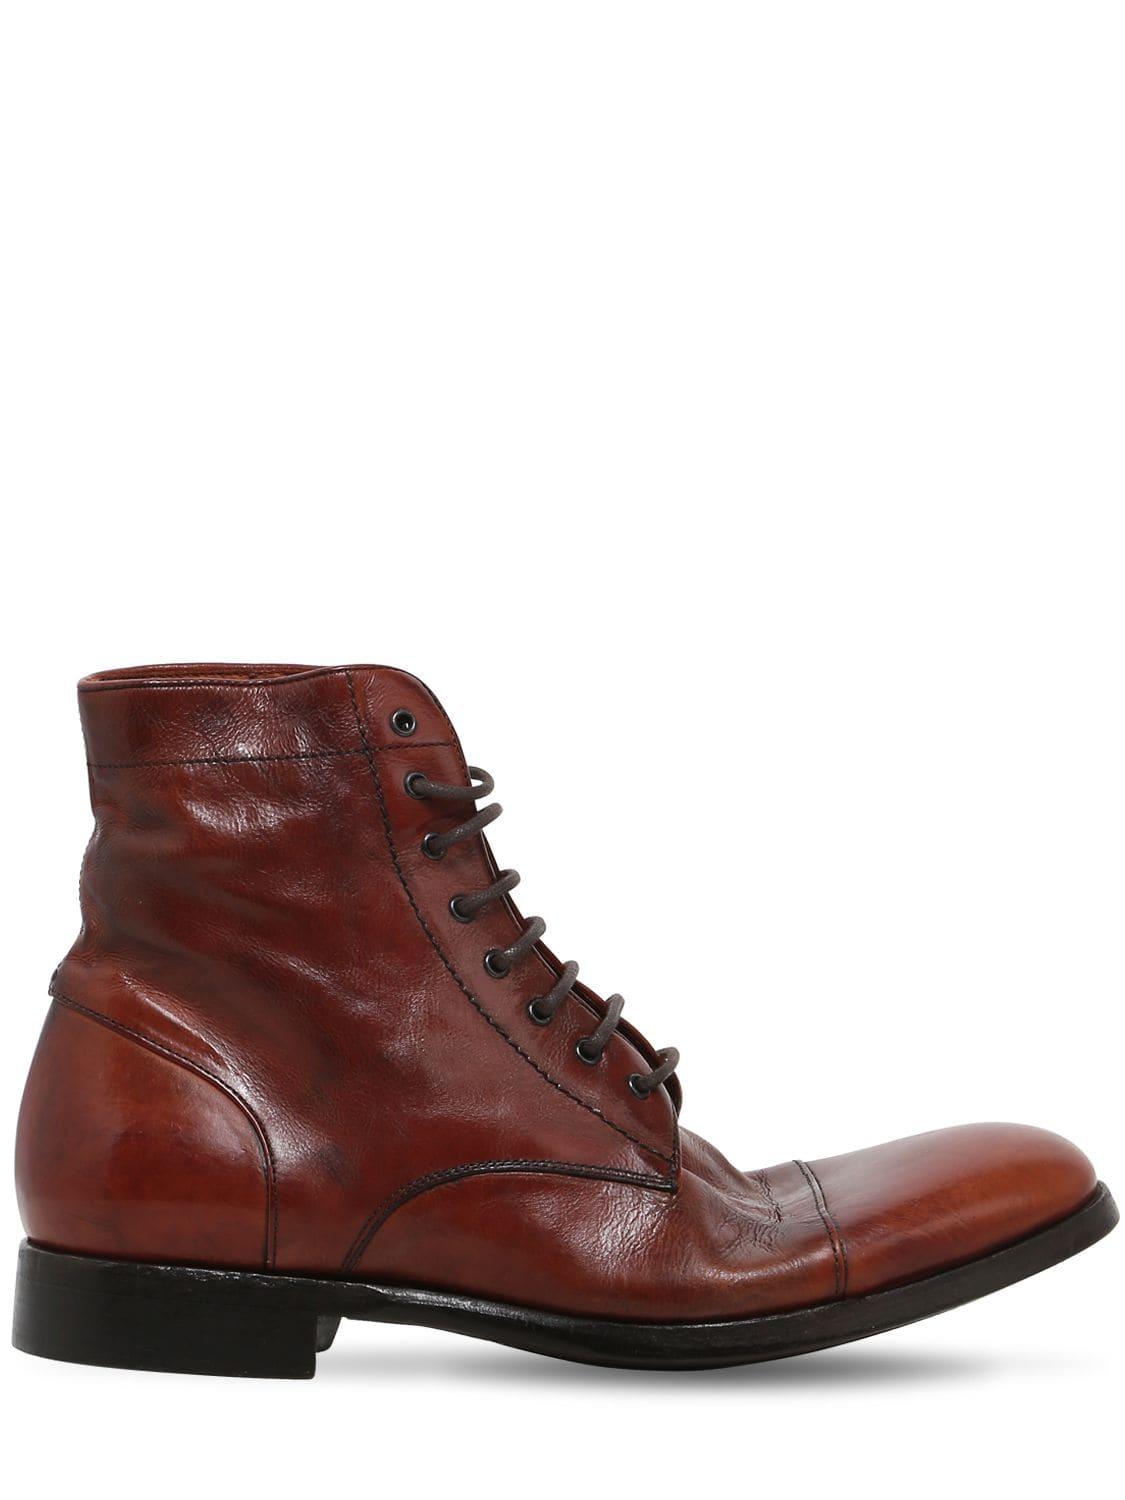 Lyst - Rolando Sturlini Washed Leather Boots in Brown for Men - Save 19 ...